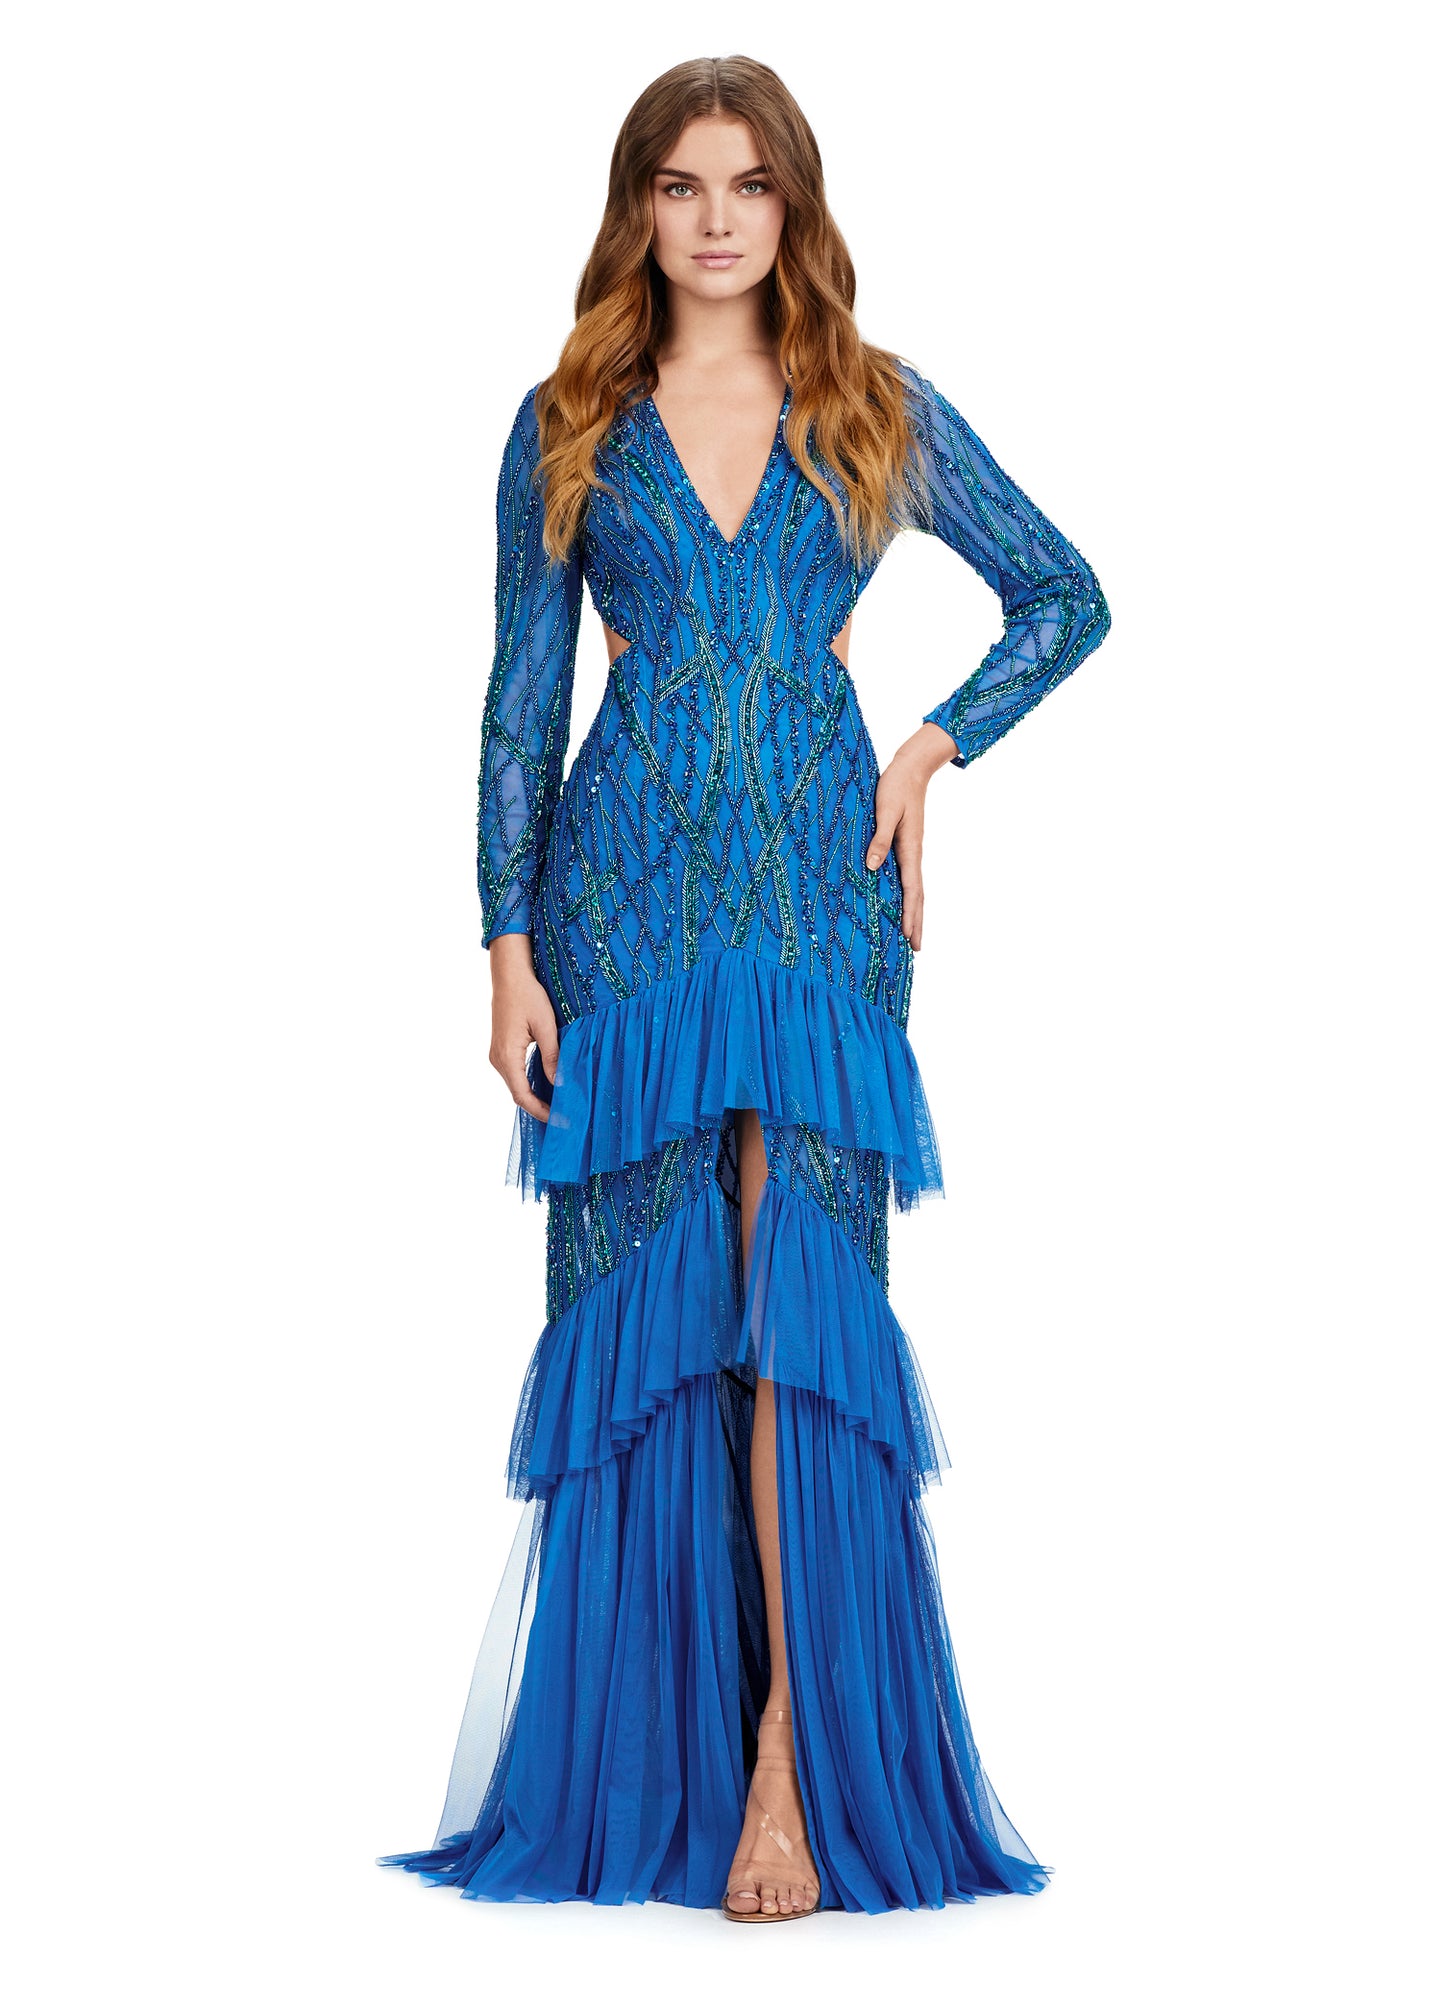 Step into elegance with the Ashley Lauren 11436 Long Prom Dress. This stunning gown features delicate beading, a flattering V-neckline, and a daring center slit with ruffled detailing. With its long sleeves, this dress is the perfect choice for a cool evening event. Make a statement in this formal gown. Fall in love with this gorgeous fully beaded long sleeve gown. Featuring an open back and center slit, this dress embodies effortless allure!